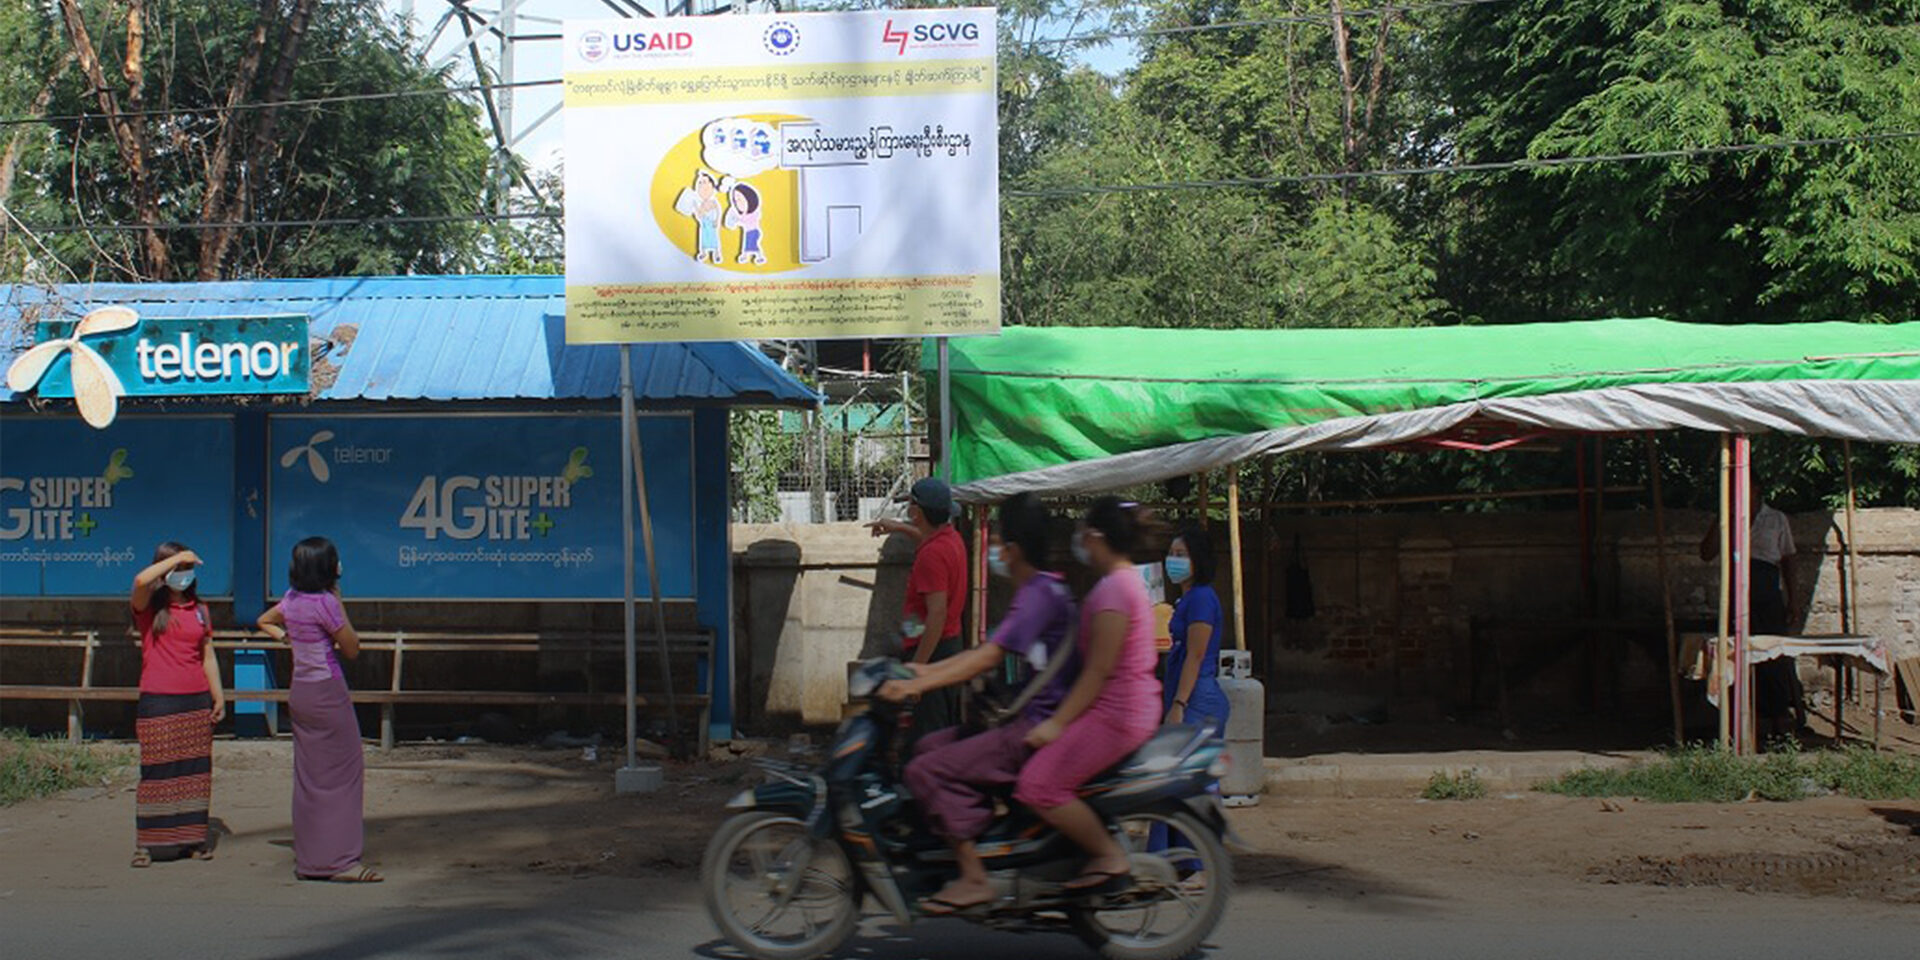 Passengers on a motorbike pass a USAID PRLM billboard about preventing and reporting human trafficking.